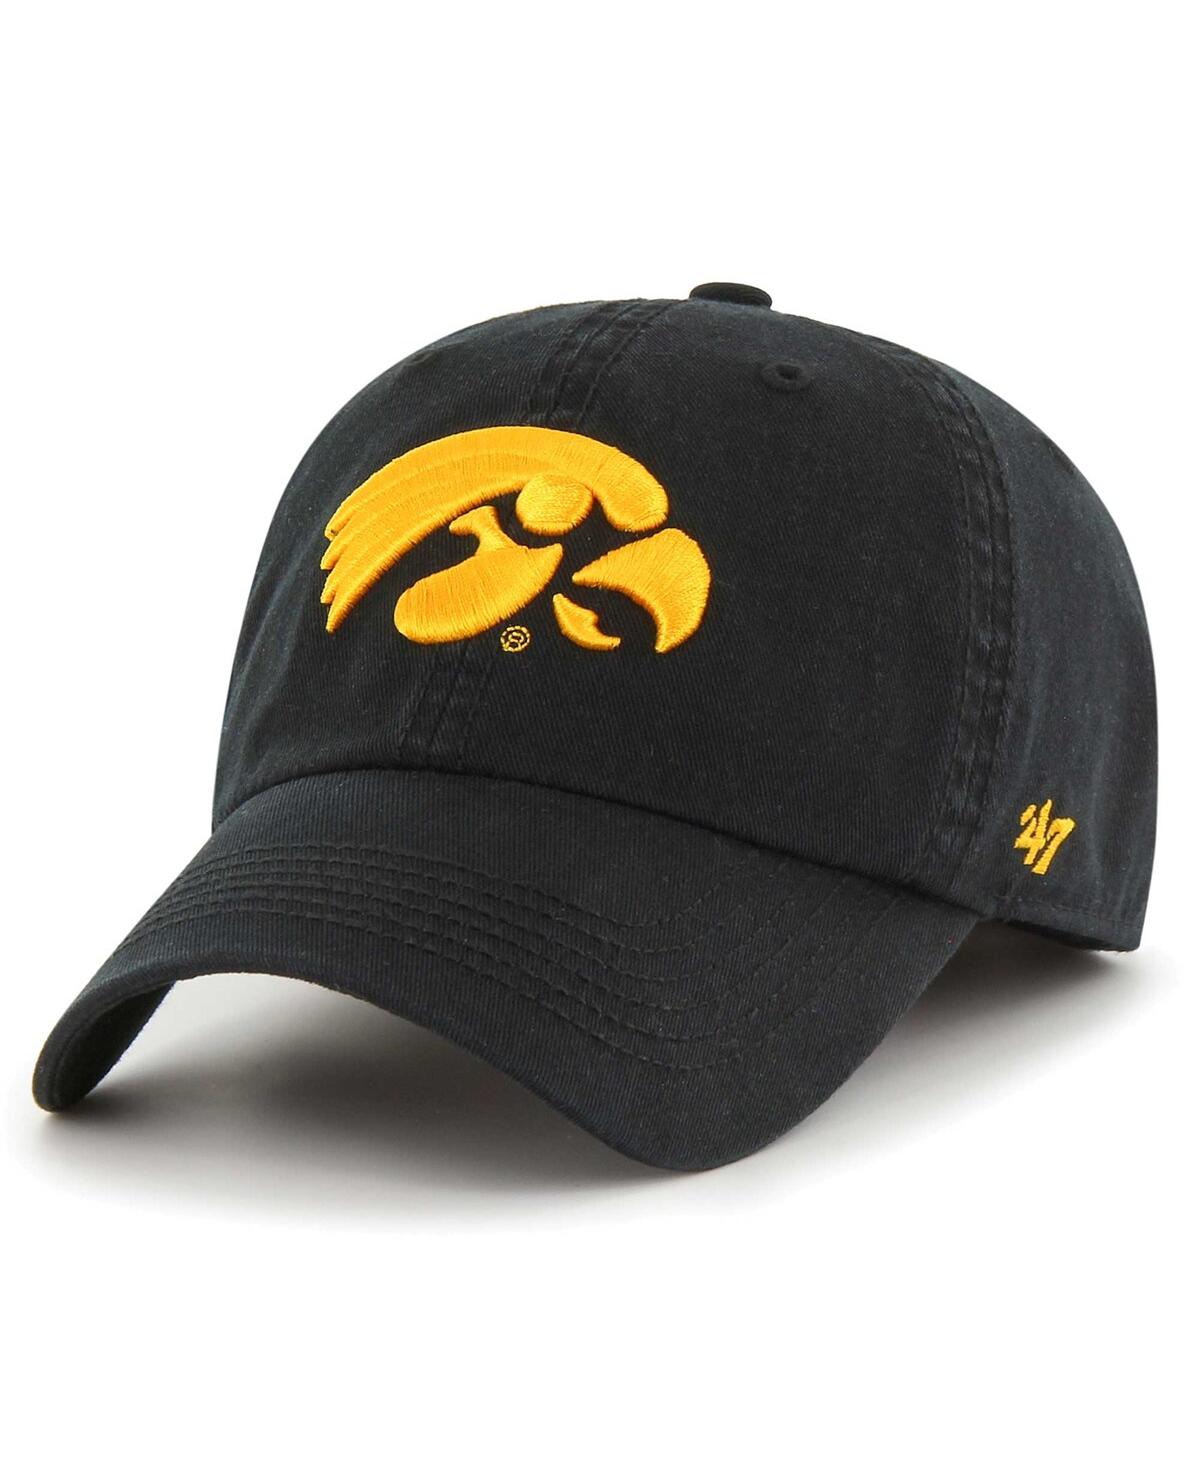 47 Brand Men's ' Black Iowa Hawkeyes Franchise Fitted Hat